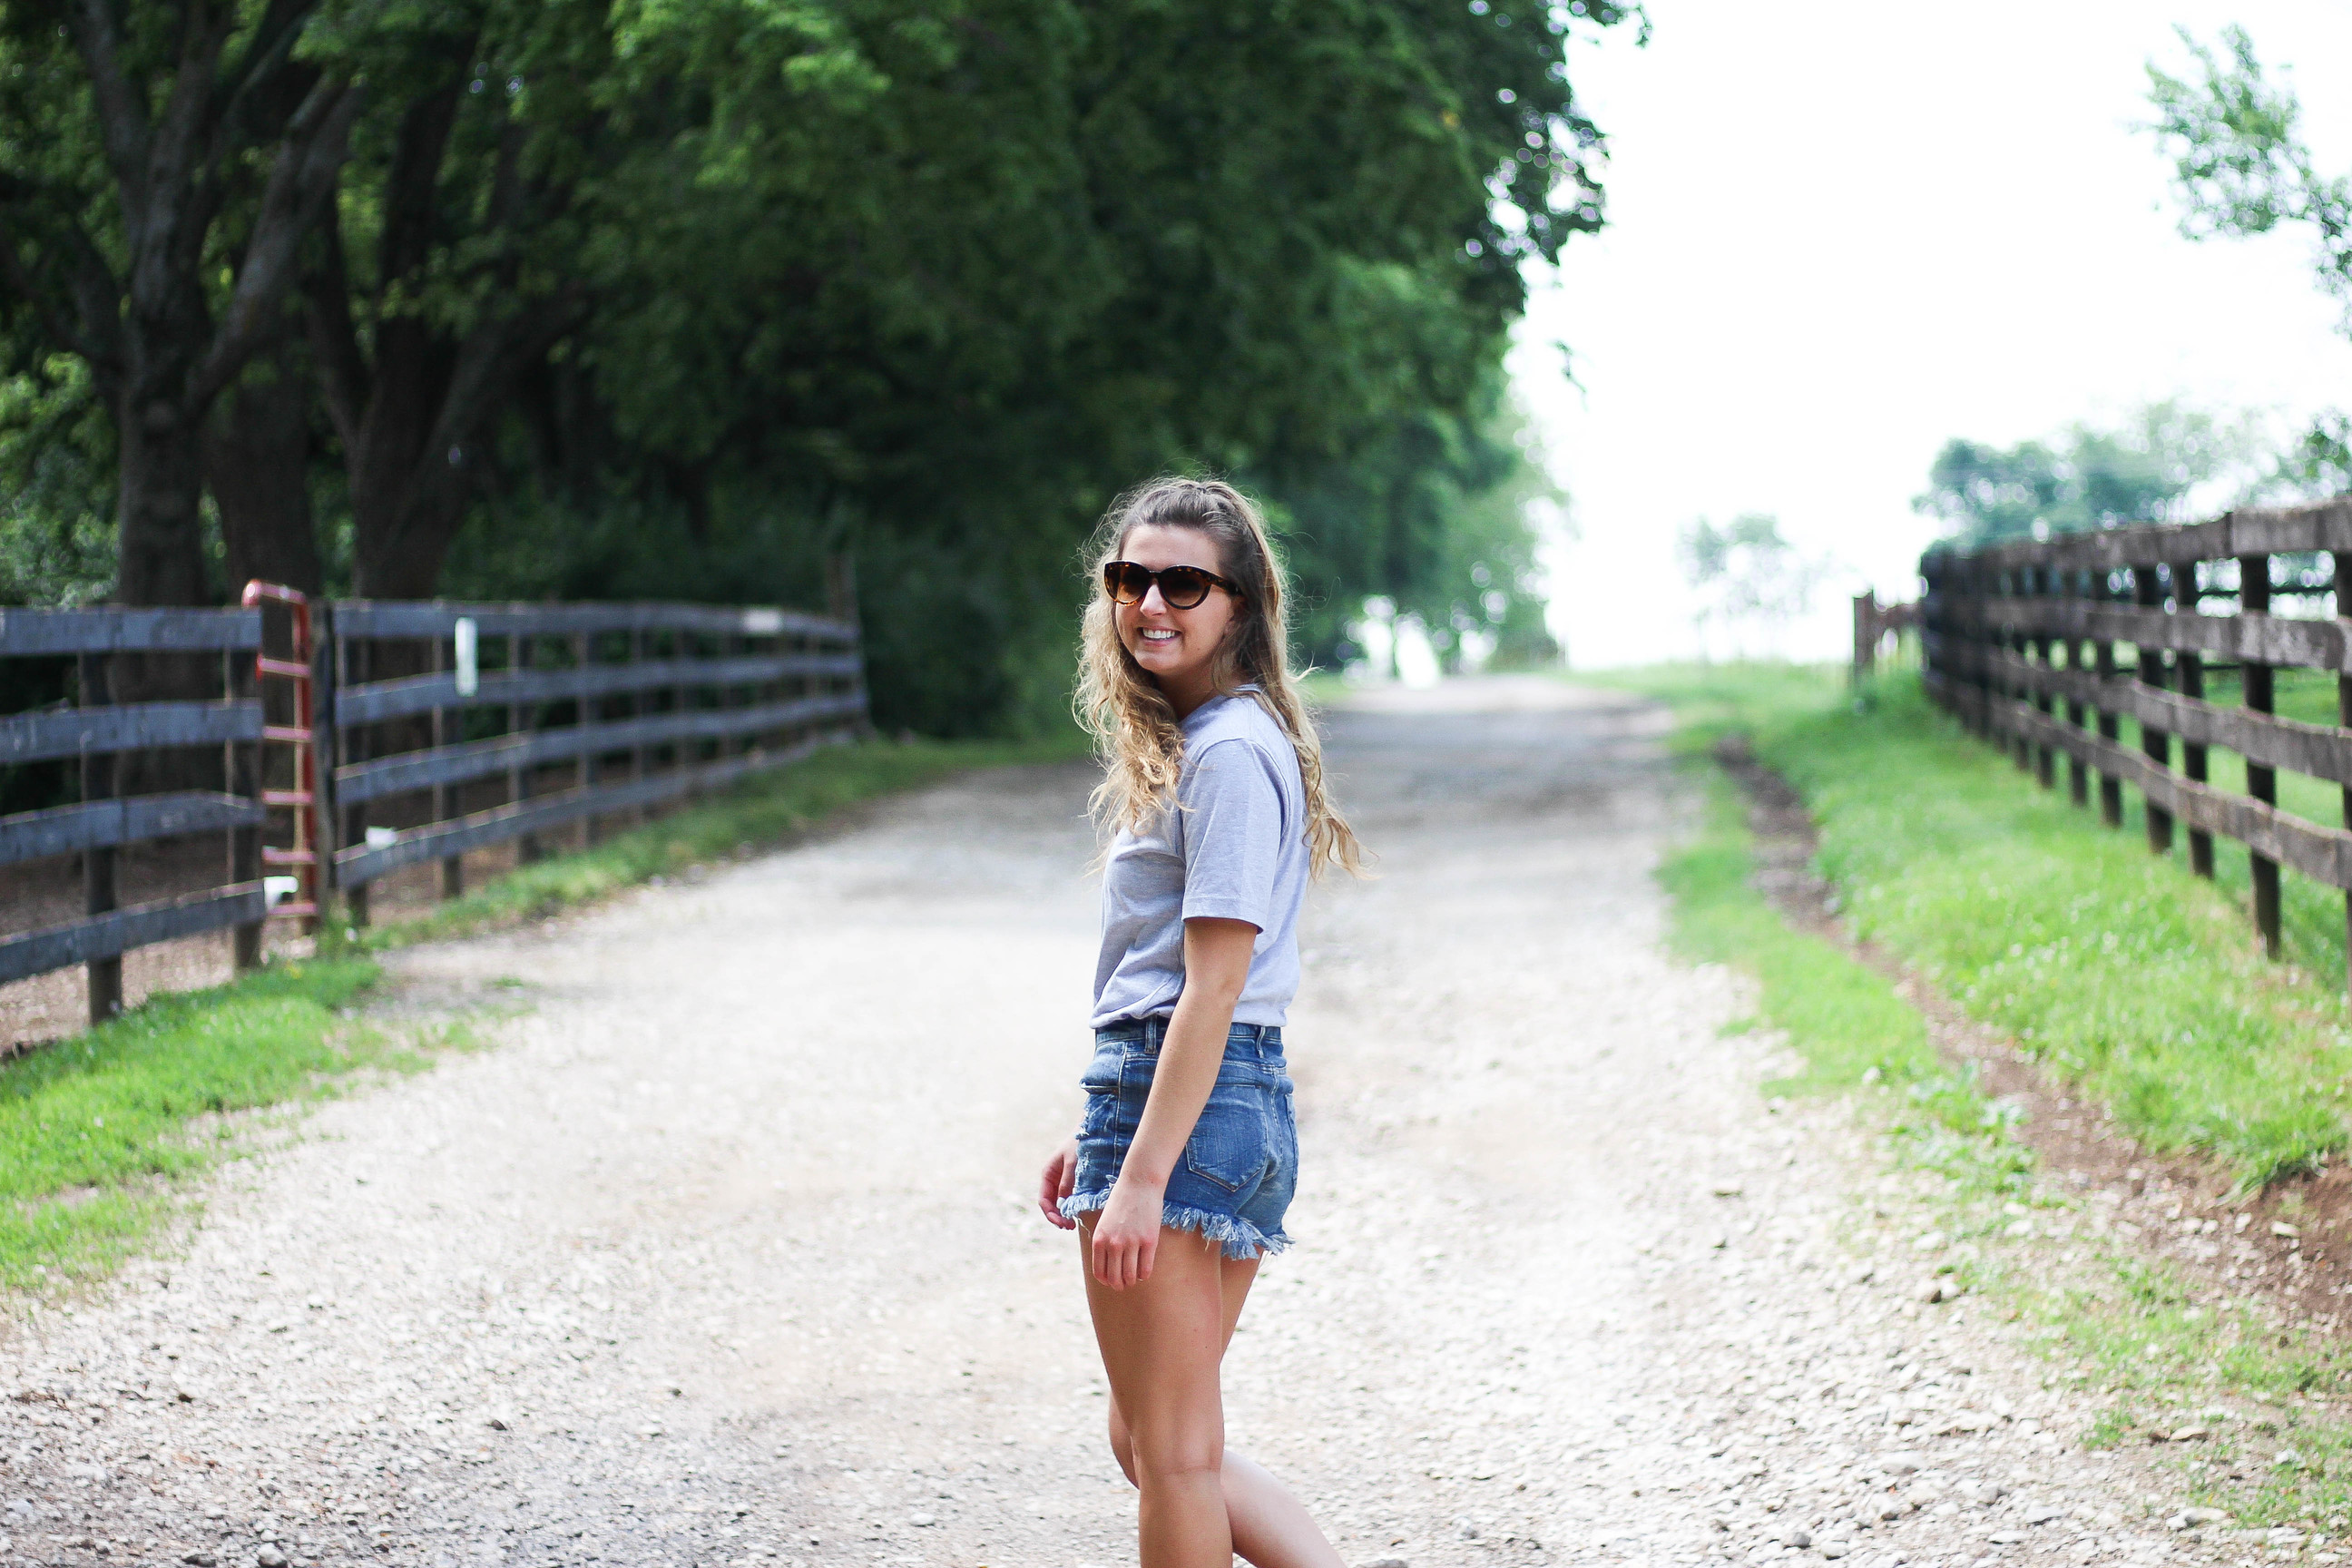 Hungry t-shirt, jean shorts, OOTD, casual outfit, by Lauren Lindmark on Daily Dose of Charm